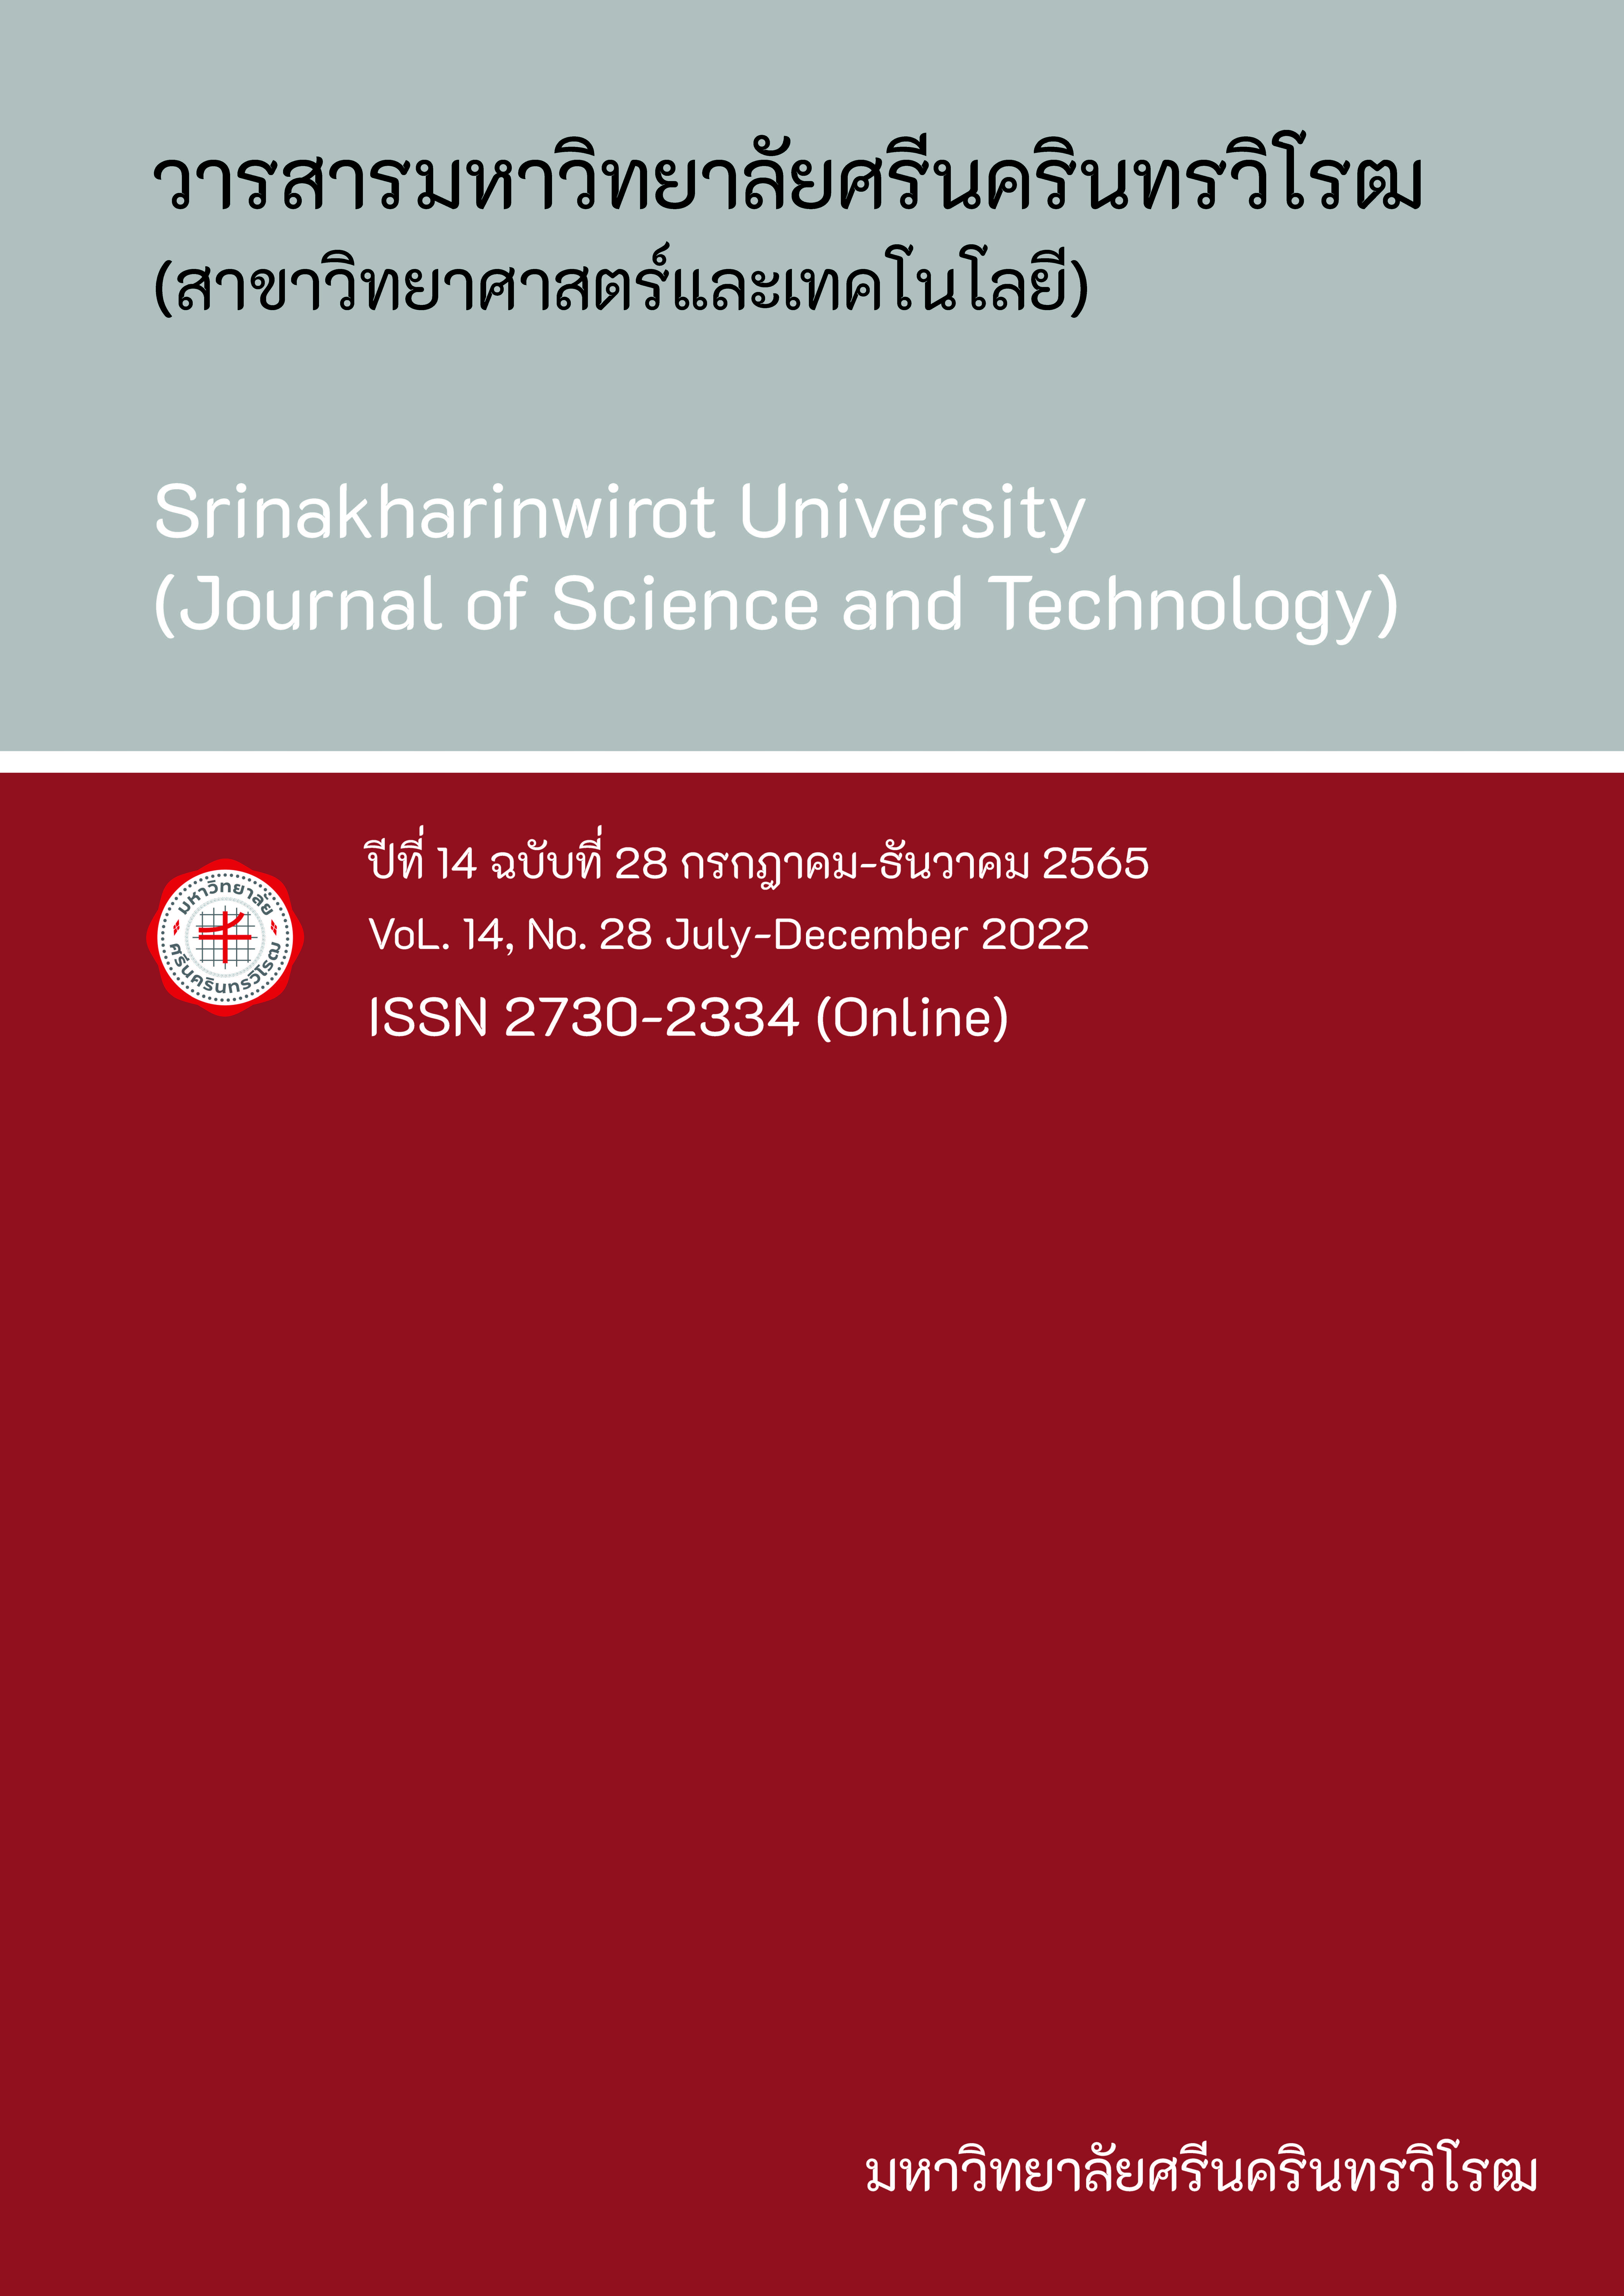 					View Vol. 14 No. 28, July-December (2022): Srinakharinwirot University (Journal of Science and Technology)
				